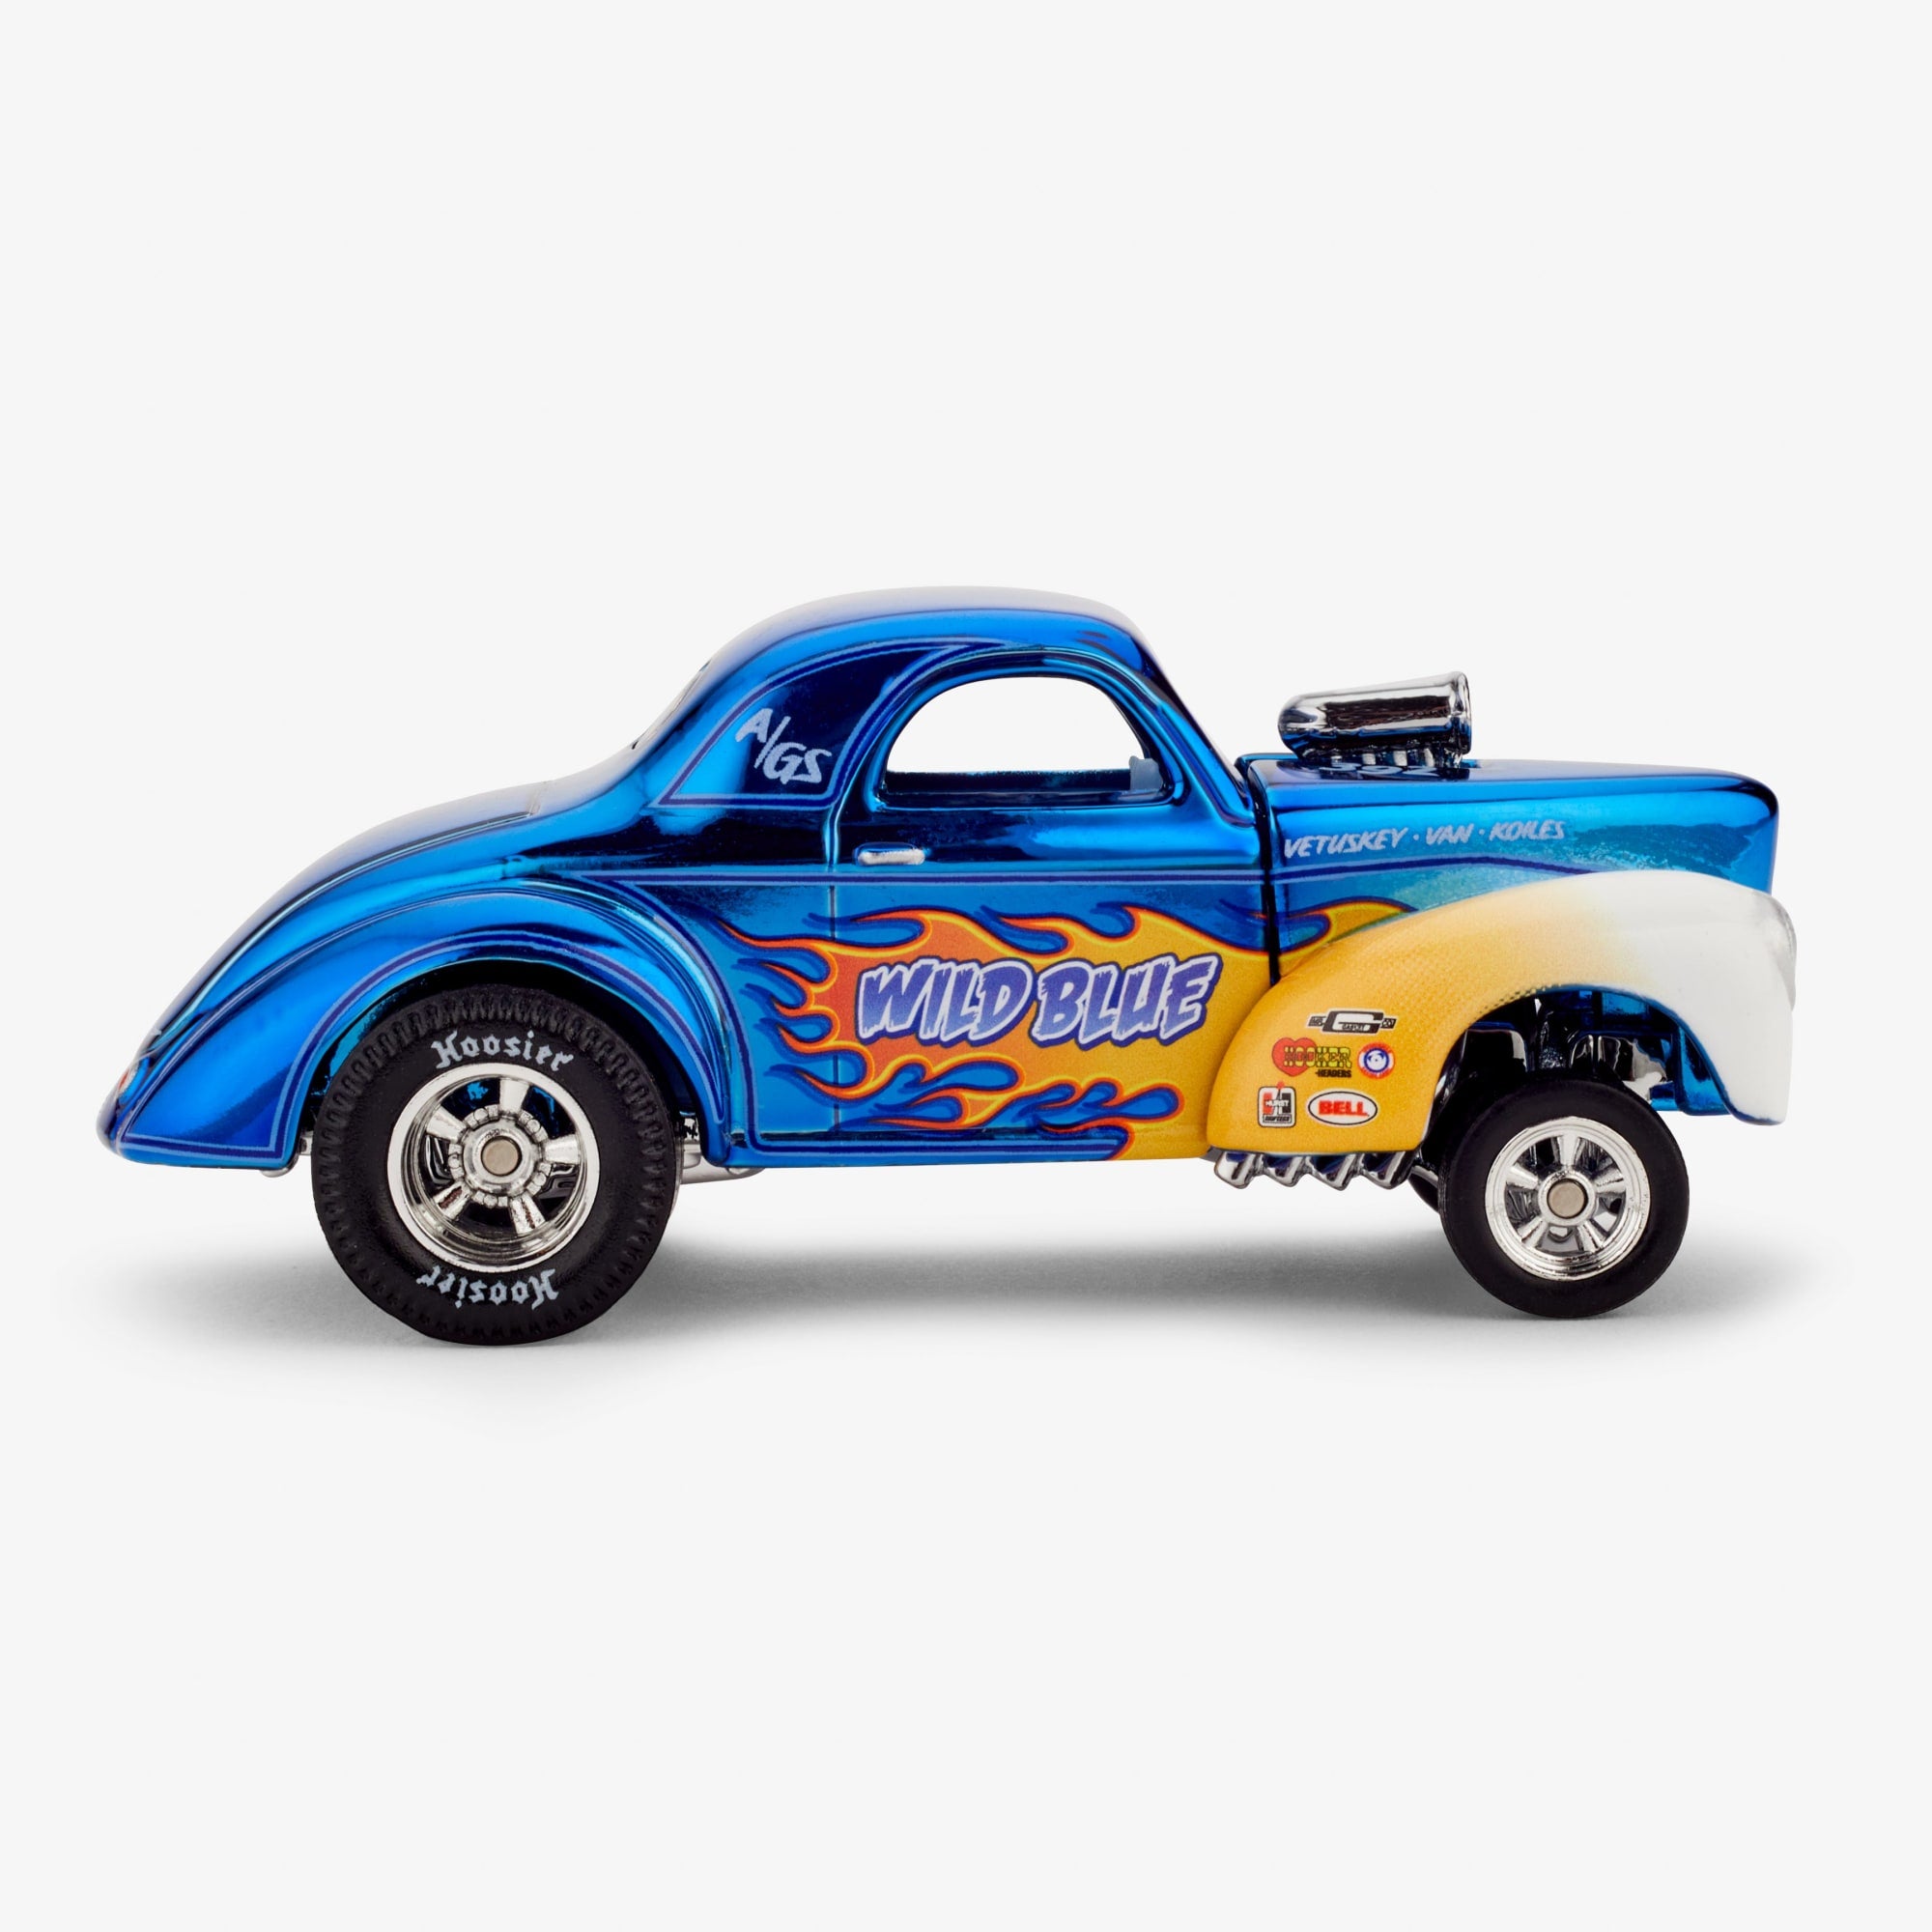 RLC sELECTIONs ’41 Willys Gasser